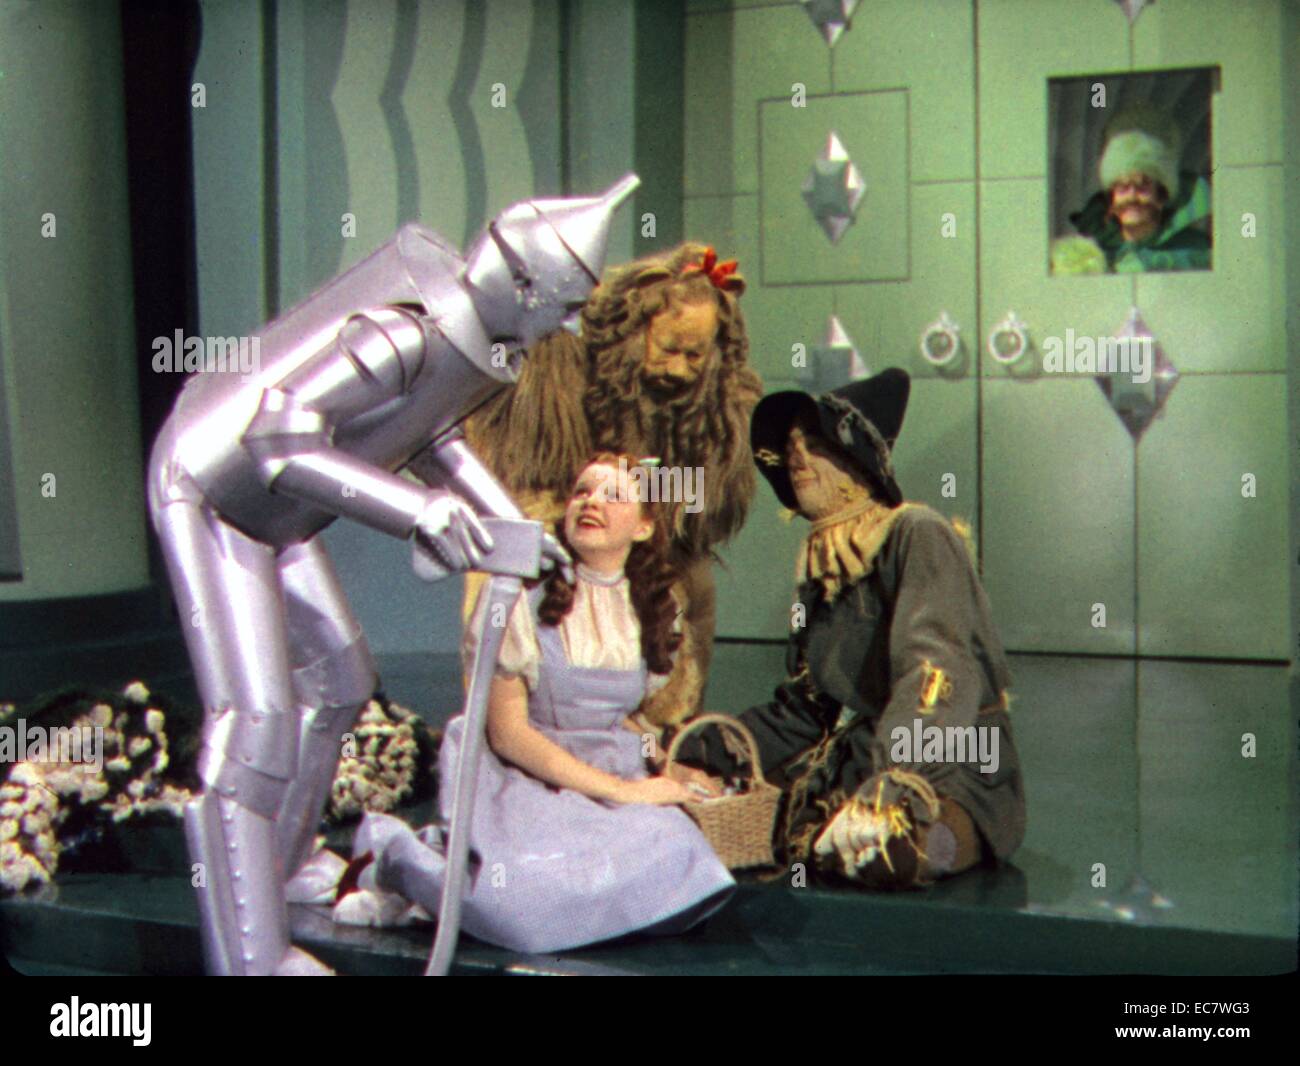 The Wizard of Oz is a 1939 American musical fantasy film produced by Metro-Goldwyn-Mayer, and the most well-known and commercial adaptation based on the 1900 novel The Wonderful Wizard of Oz by L. Frank Baum. The film stars Judy Garland Stock Photo